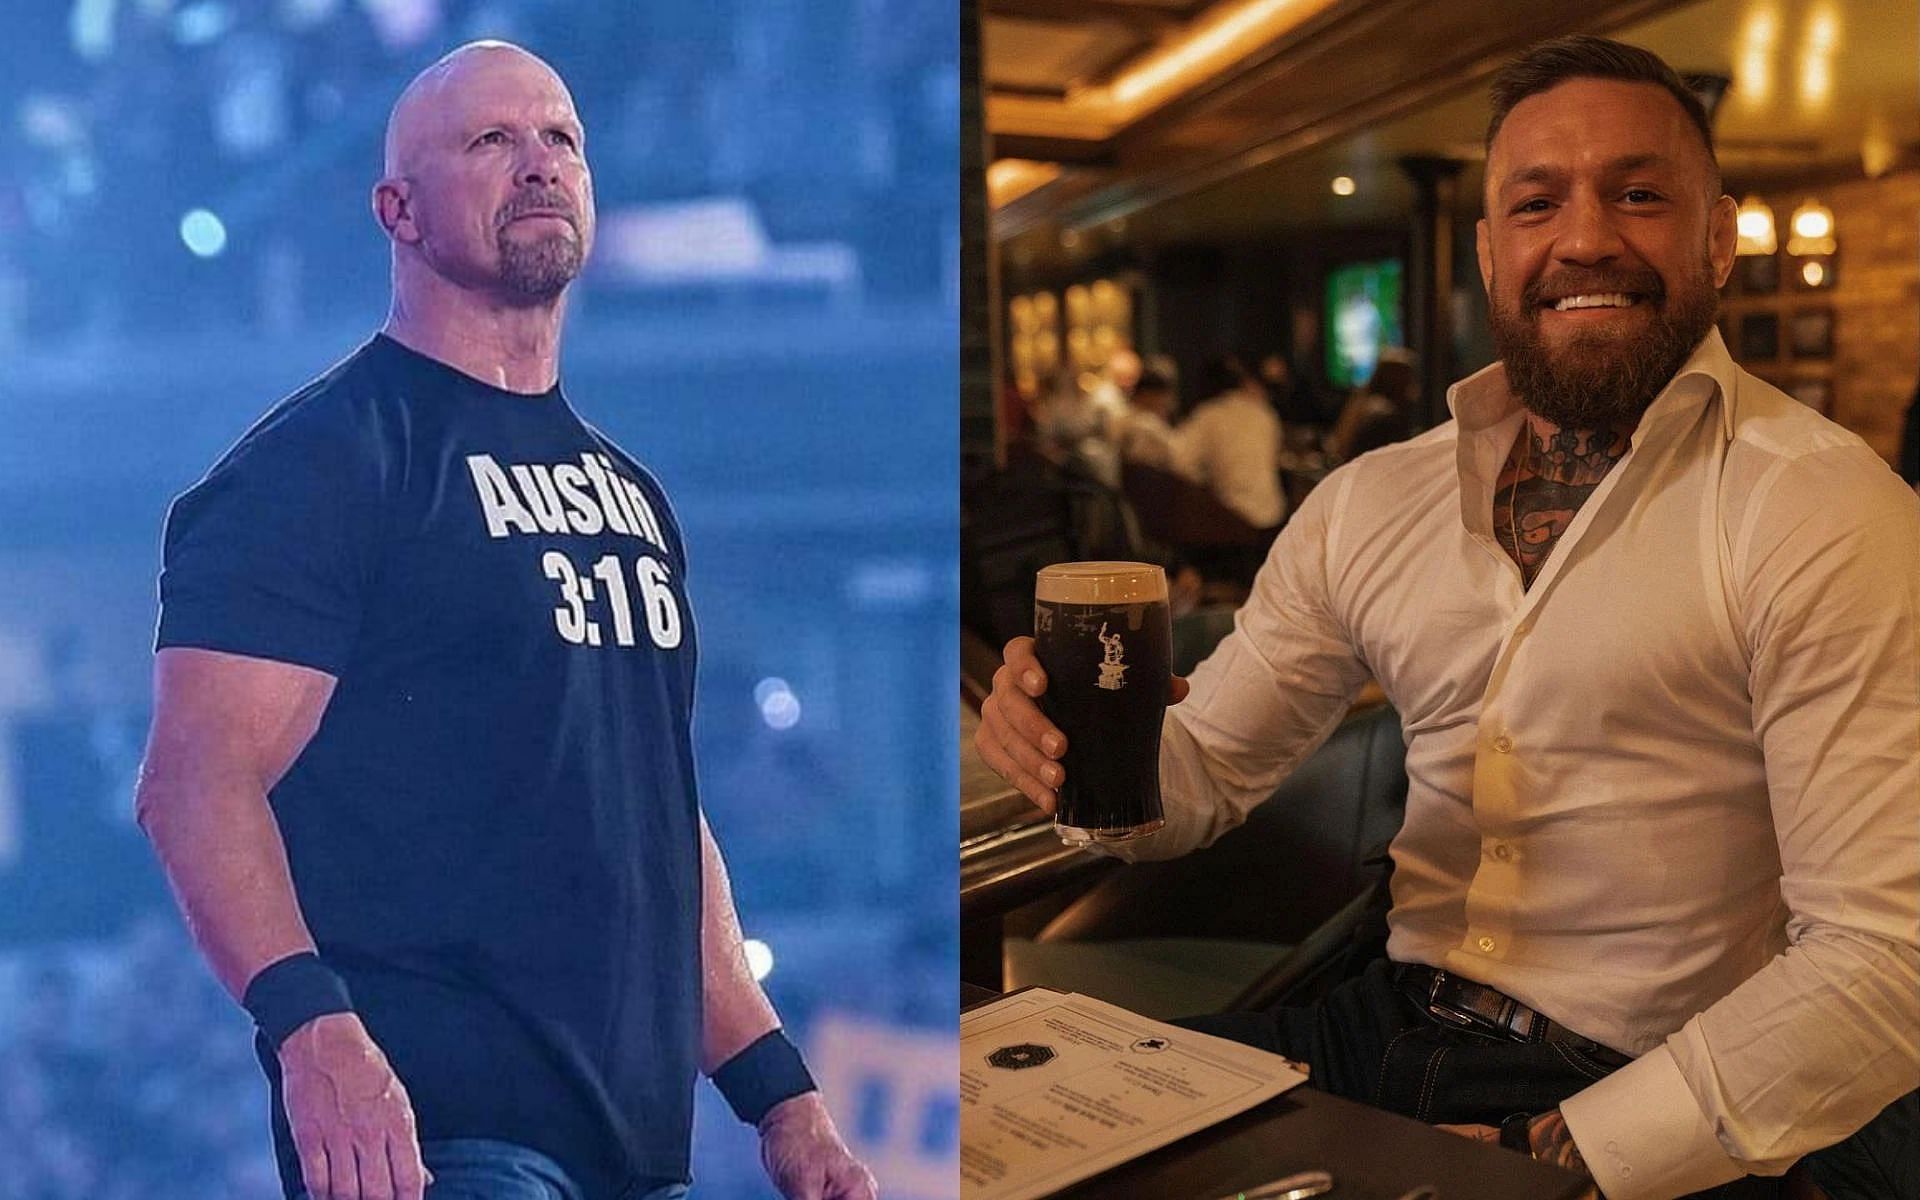 &#039;Stone Cold&#039; Steve Austin and Conor McGregor [Left image courtesy - @DirtSheetRadio on Twitter; Right image courtesy - @thenotoriousmma on Instagram]